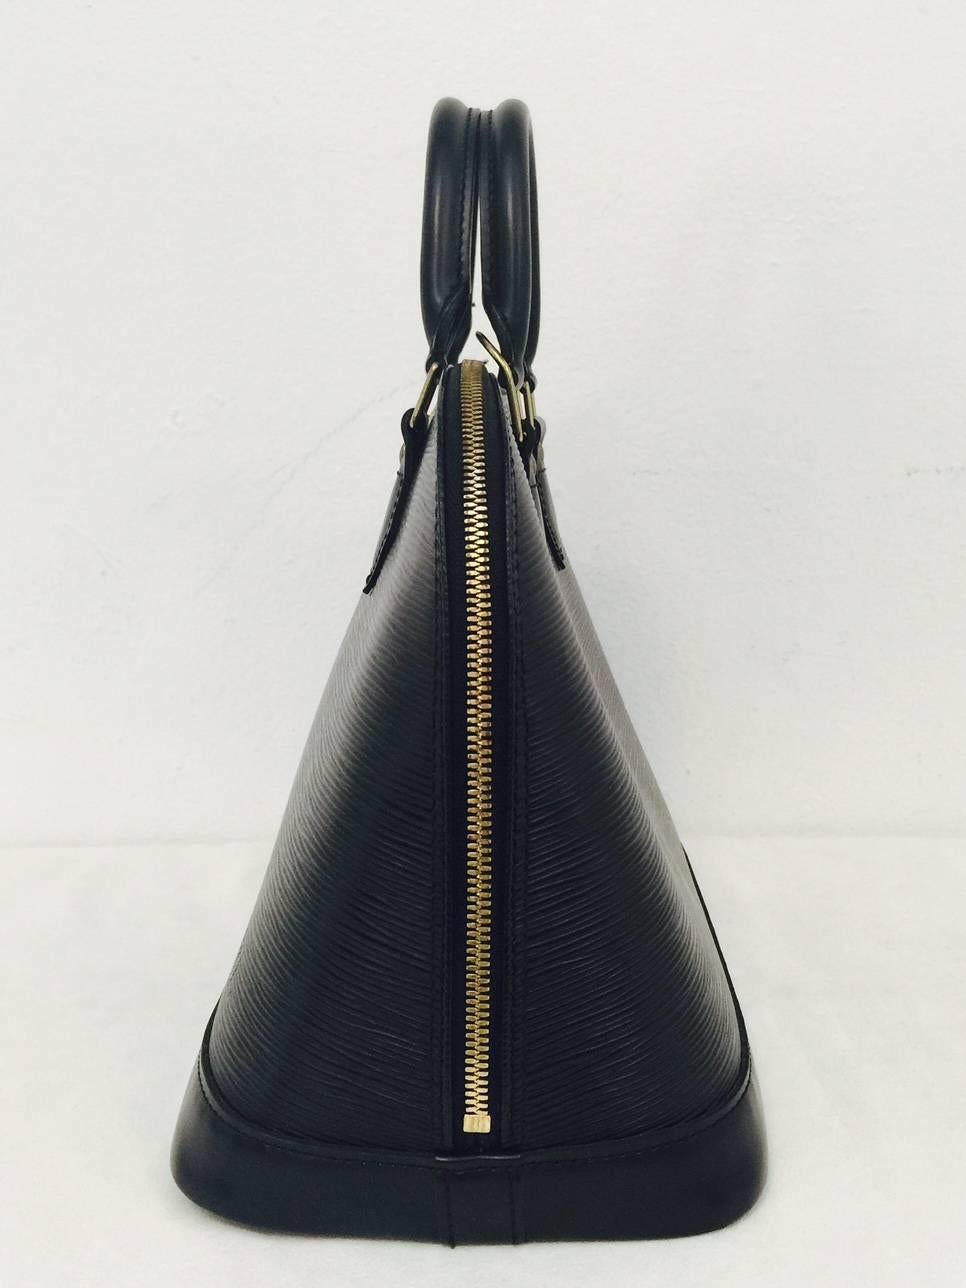 This classic bag was introduced in the 1930’s and is synonymous with one of the world's most celebrated luxury brands, Louis Vuitton!  Crafted from grained cowhide, and utilizing the elegant Epi leather, this particular bag shines and is in